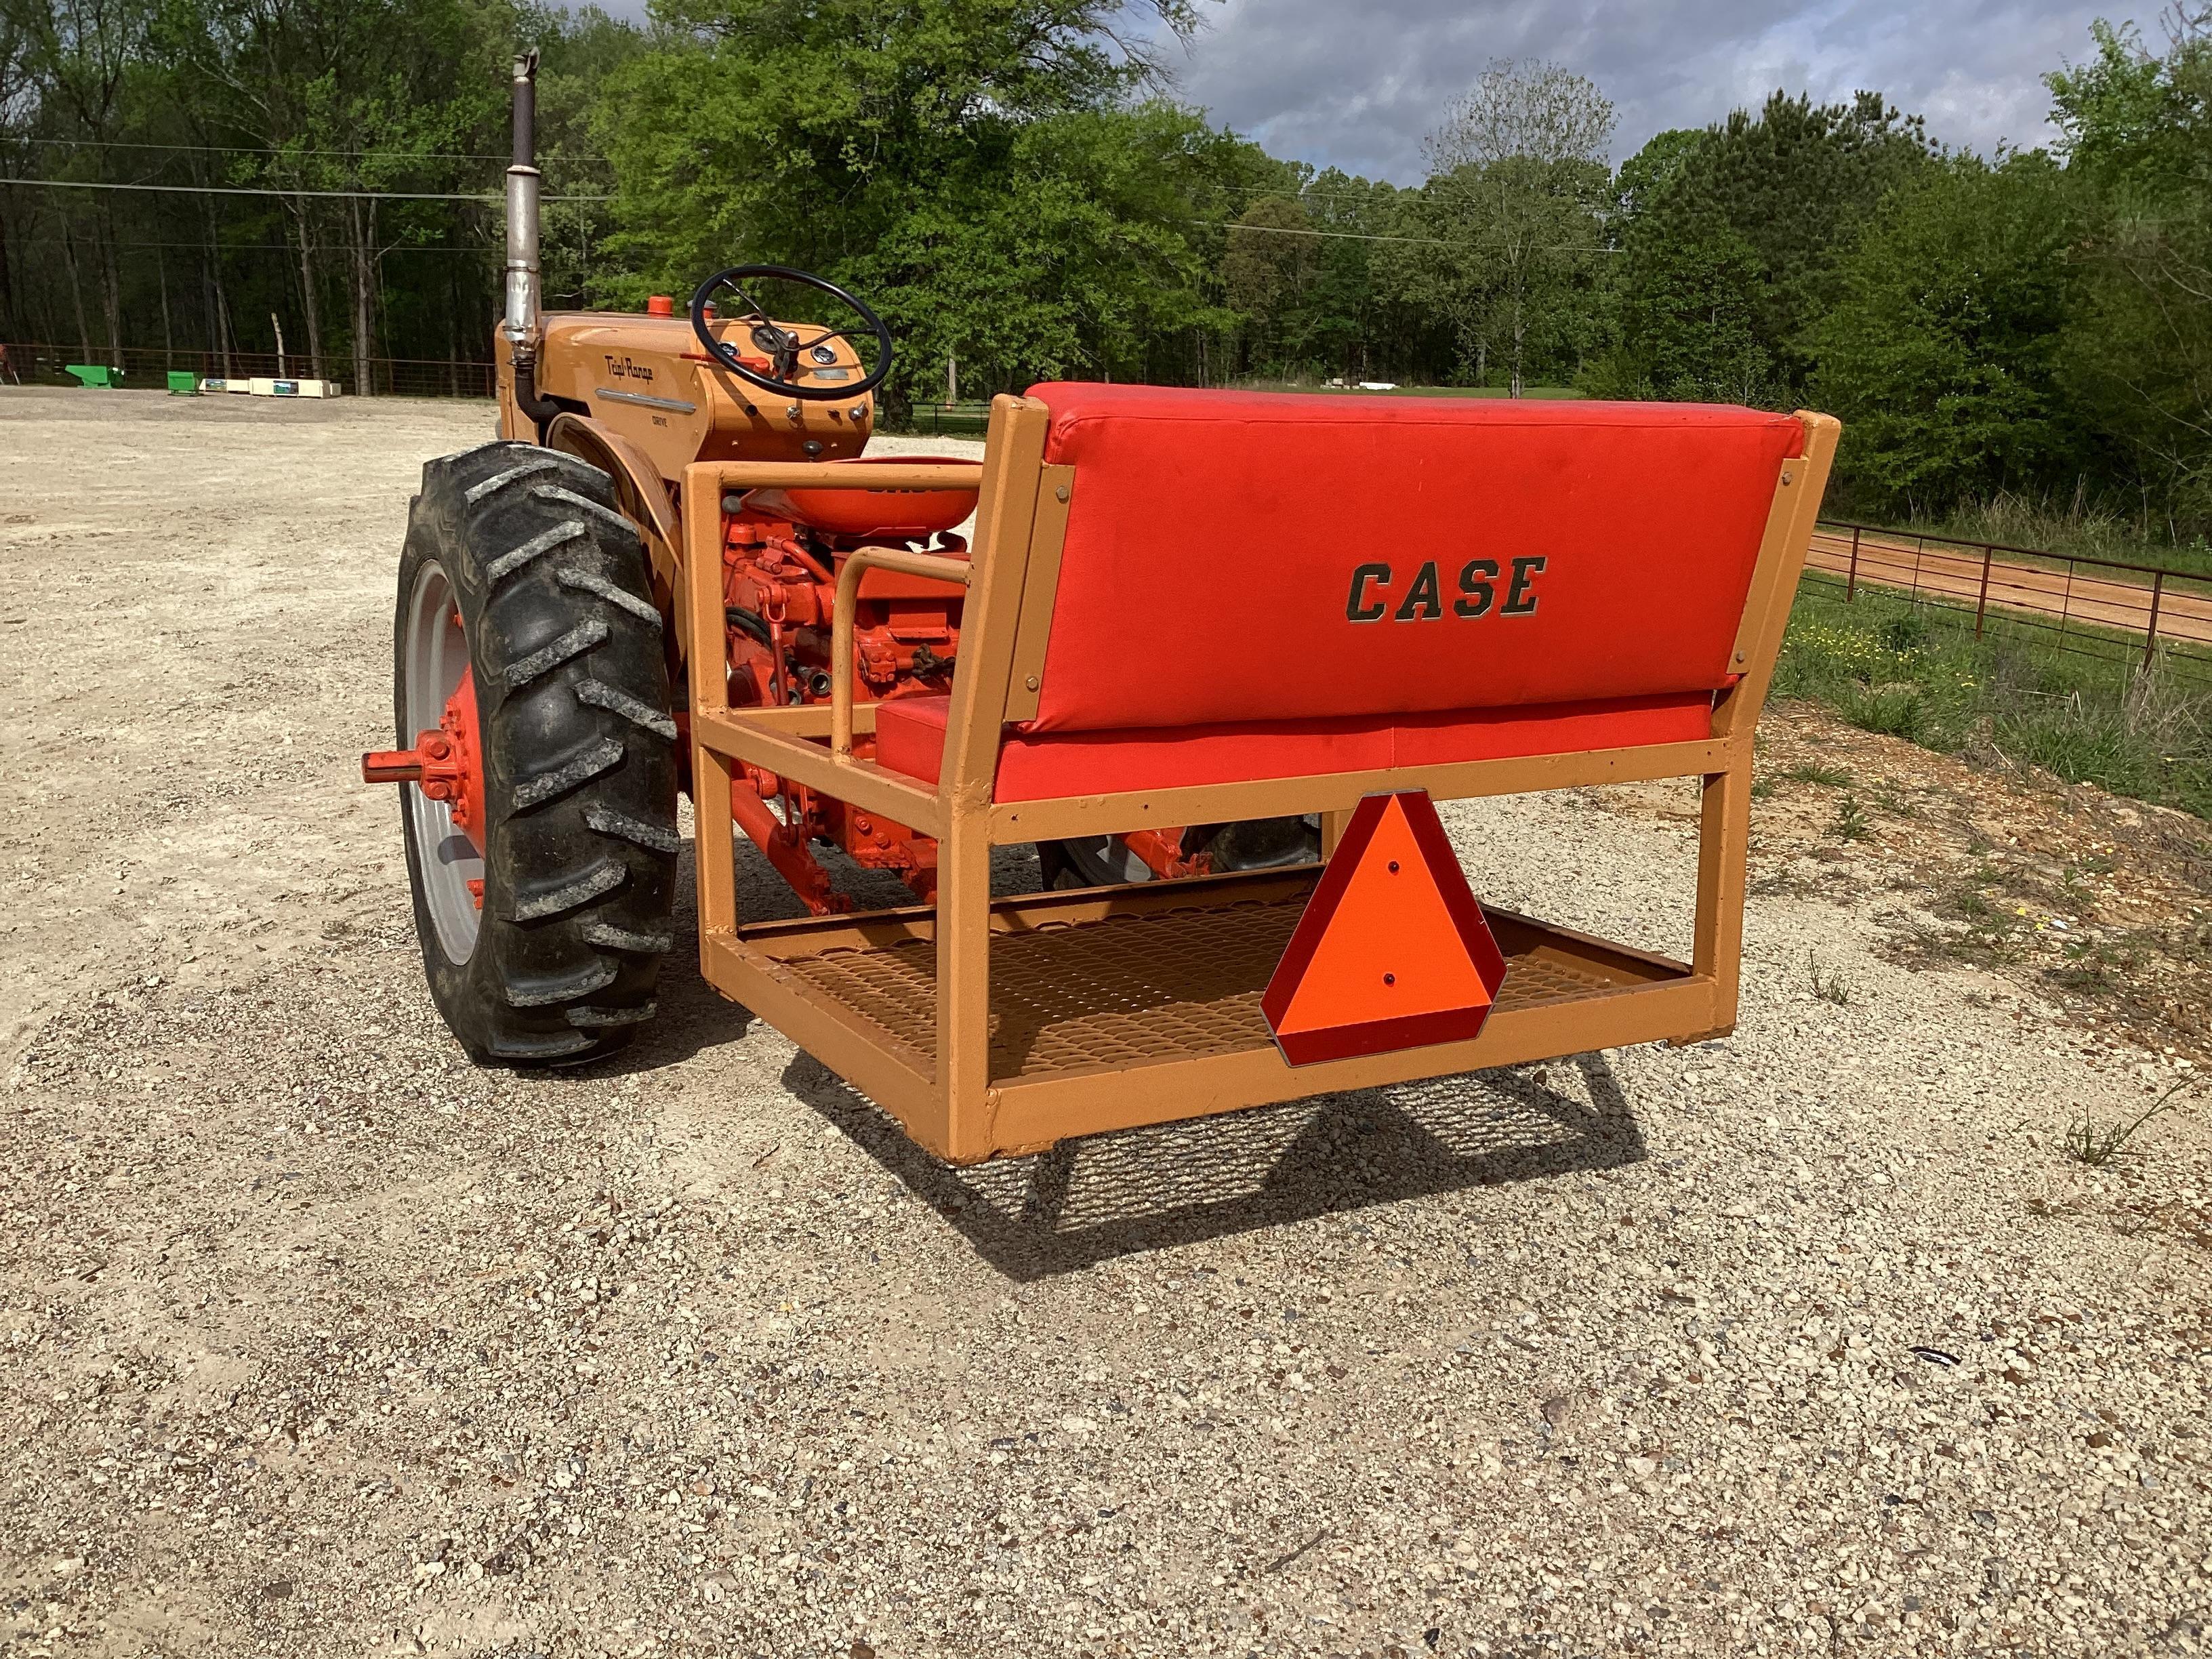 1958 Case 200 Tractor